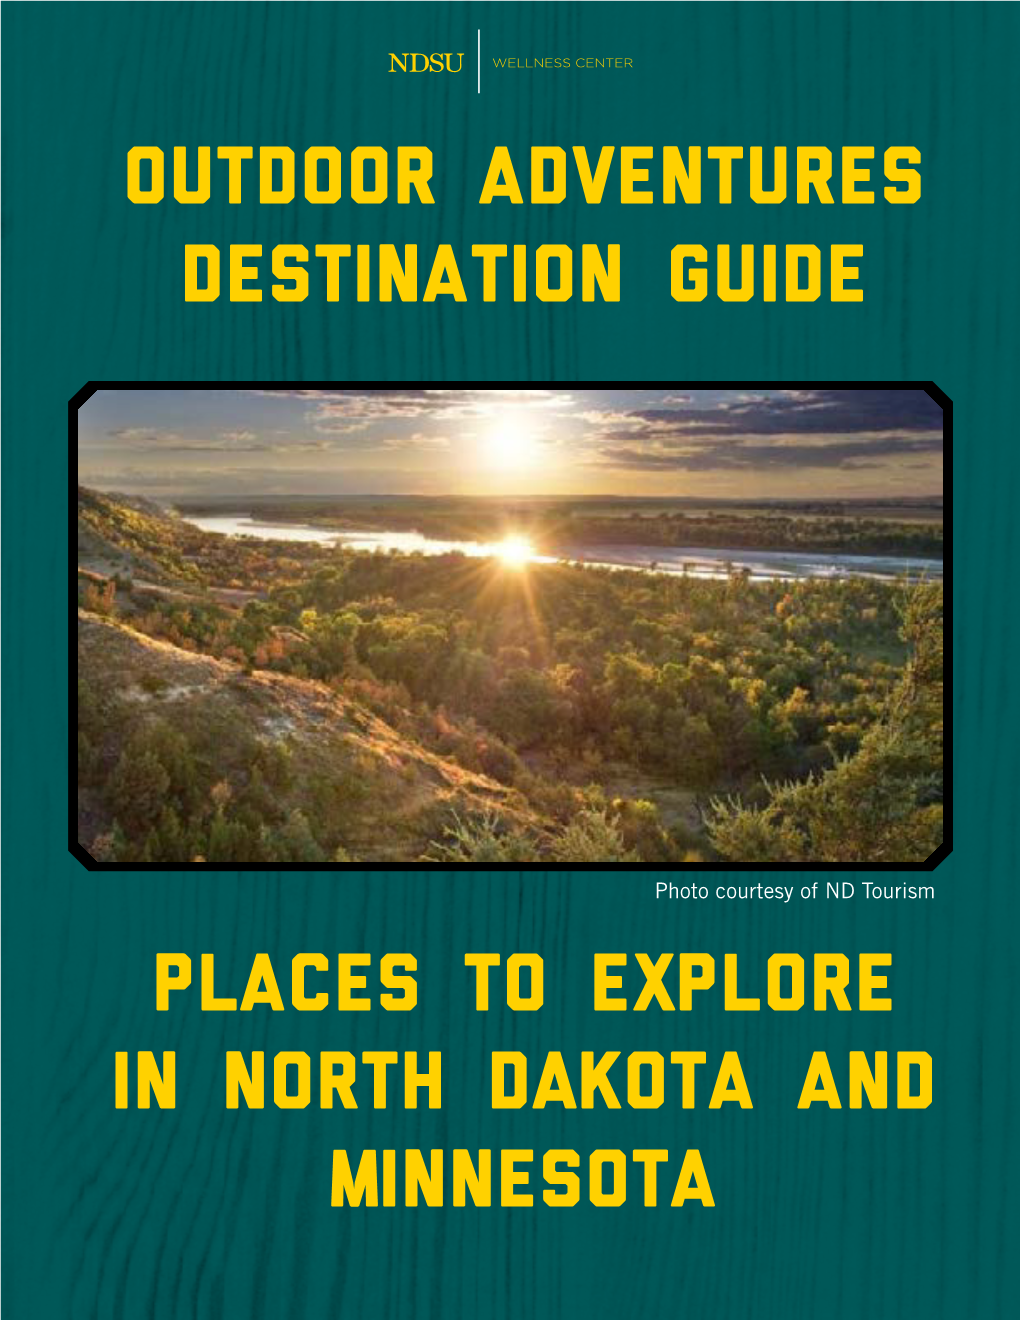 Hiking, Cross-Country Skiing, Snowshoe- Ing, Biking, Fishing and Boat Launch Website Directions and Map